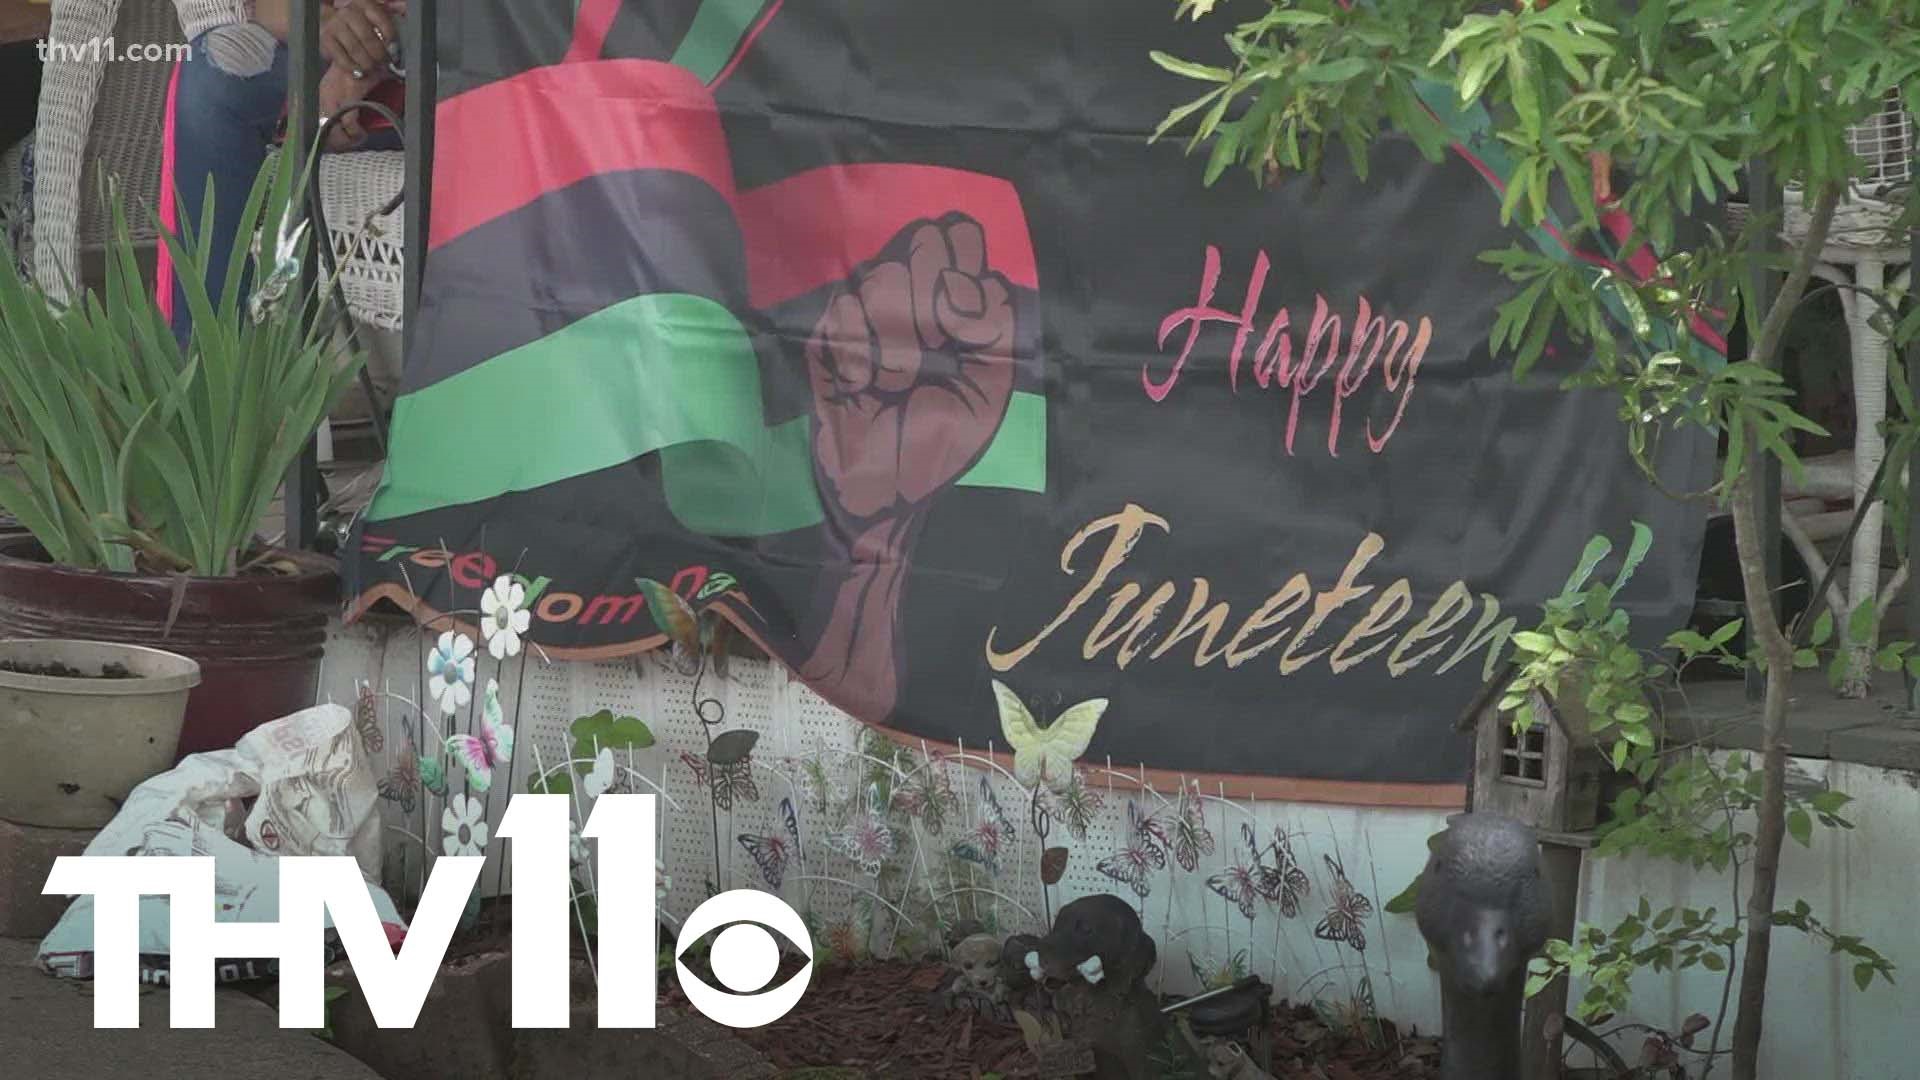 While tomorrow is the official holiday, a number of Juneteenth celebrations took place on Saturday, with Wilmar keeping their tradition alive.